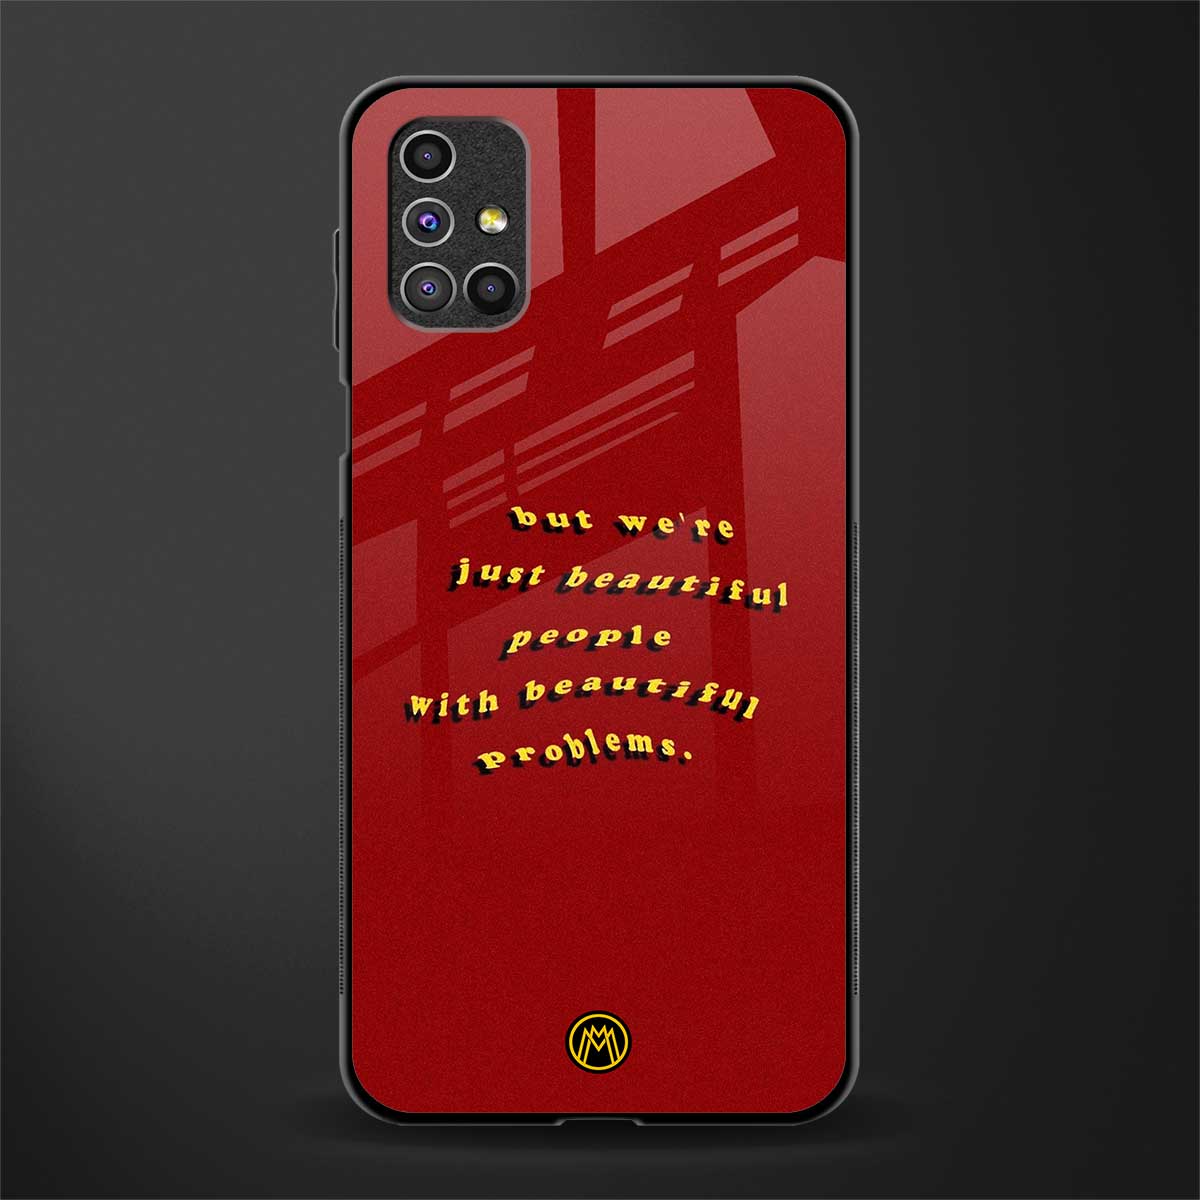 beautiful people with beautiful problems glass case for samsung galaxy m31s image